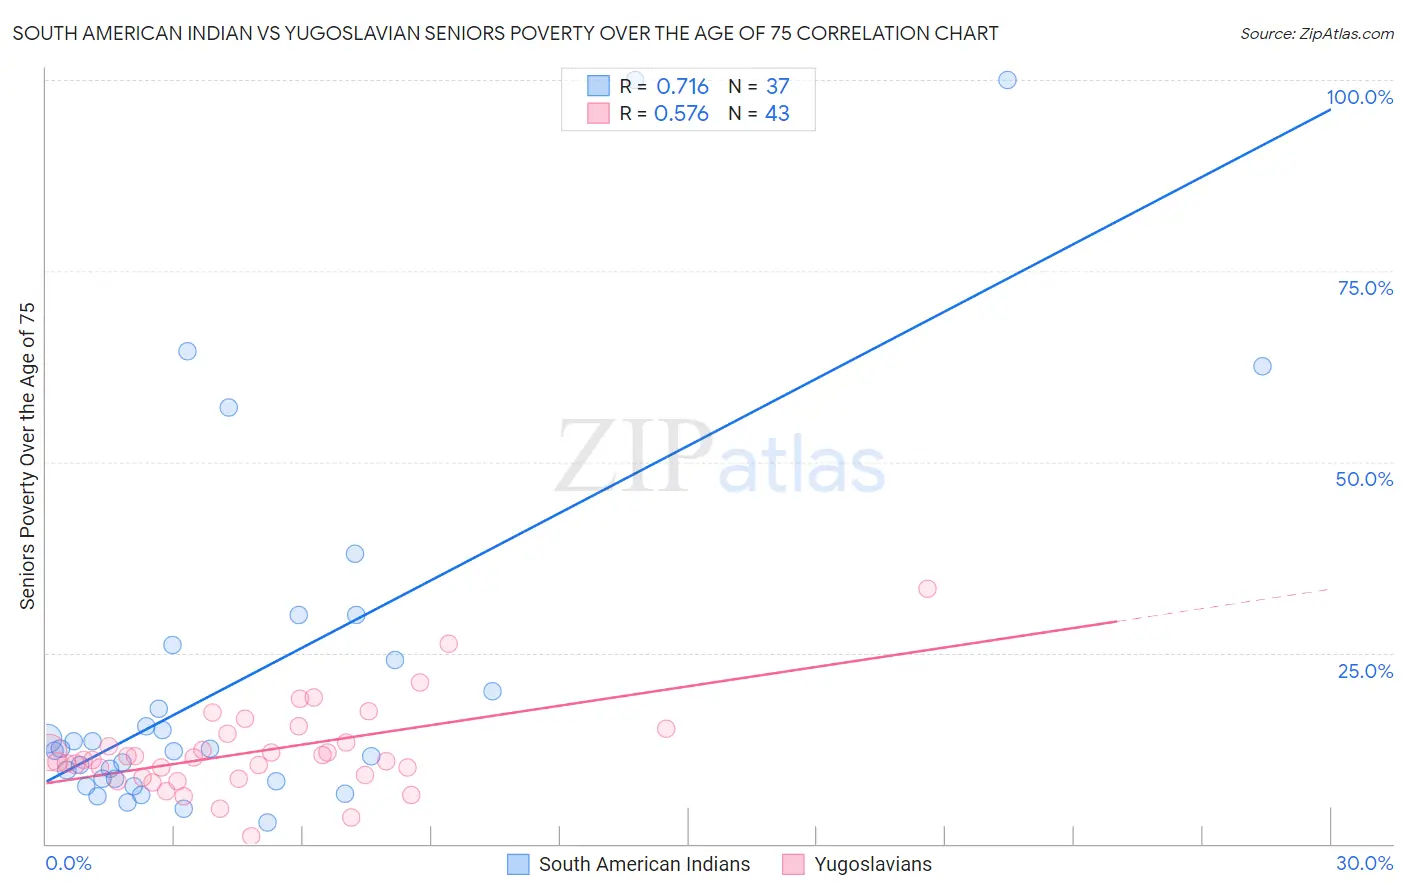 South American Indian vs Yugoslavian Seniors Poverty Over the Age of 75